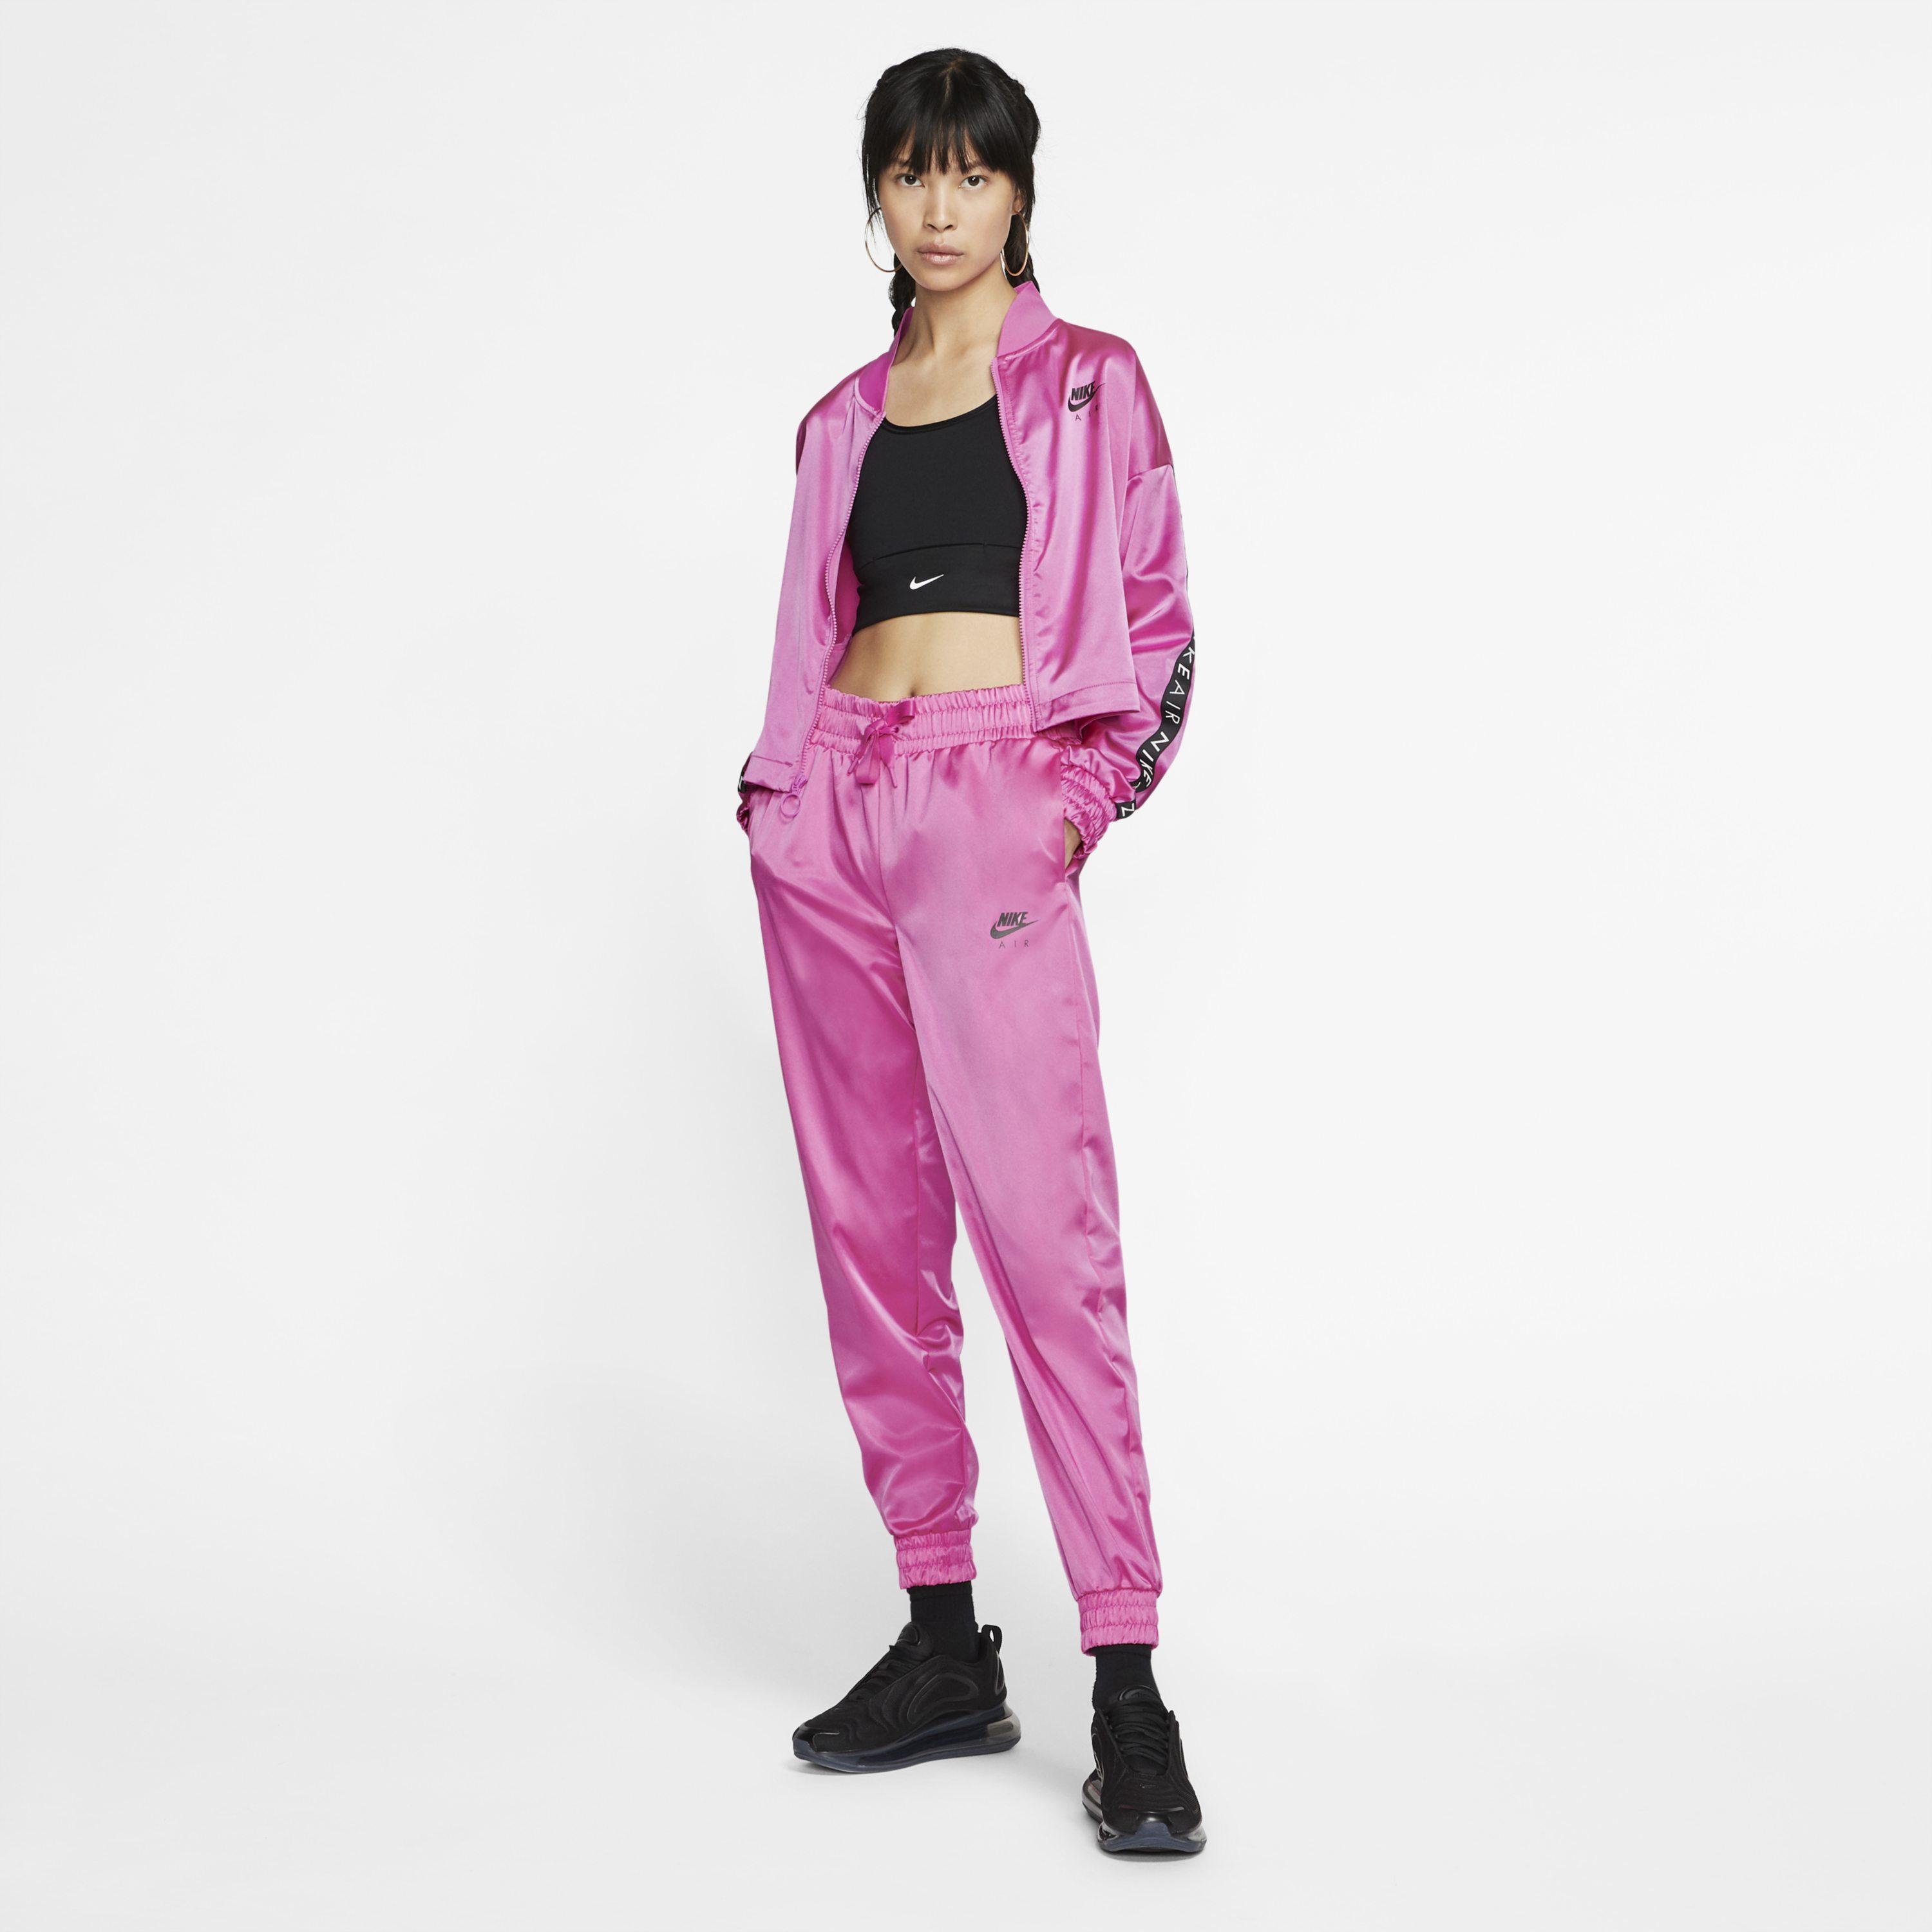 Obediente Nos vemos mañana tabaco Pink Nike Tracksuit Womens Spain, SAVE 48% - aveclumiere.com